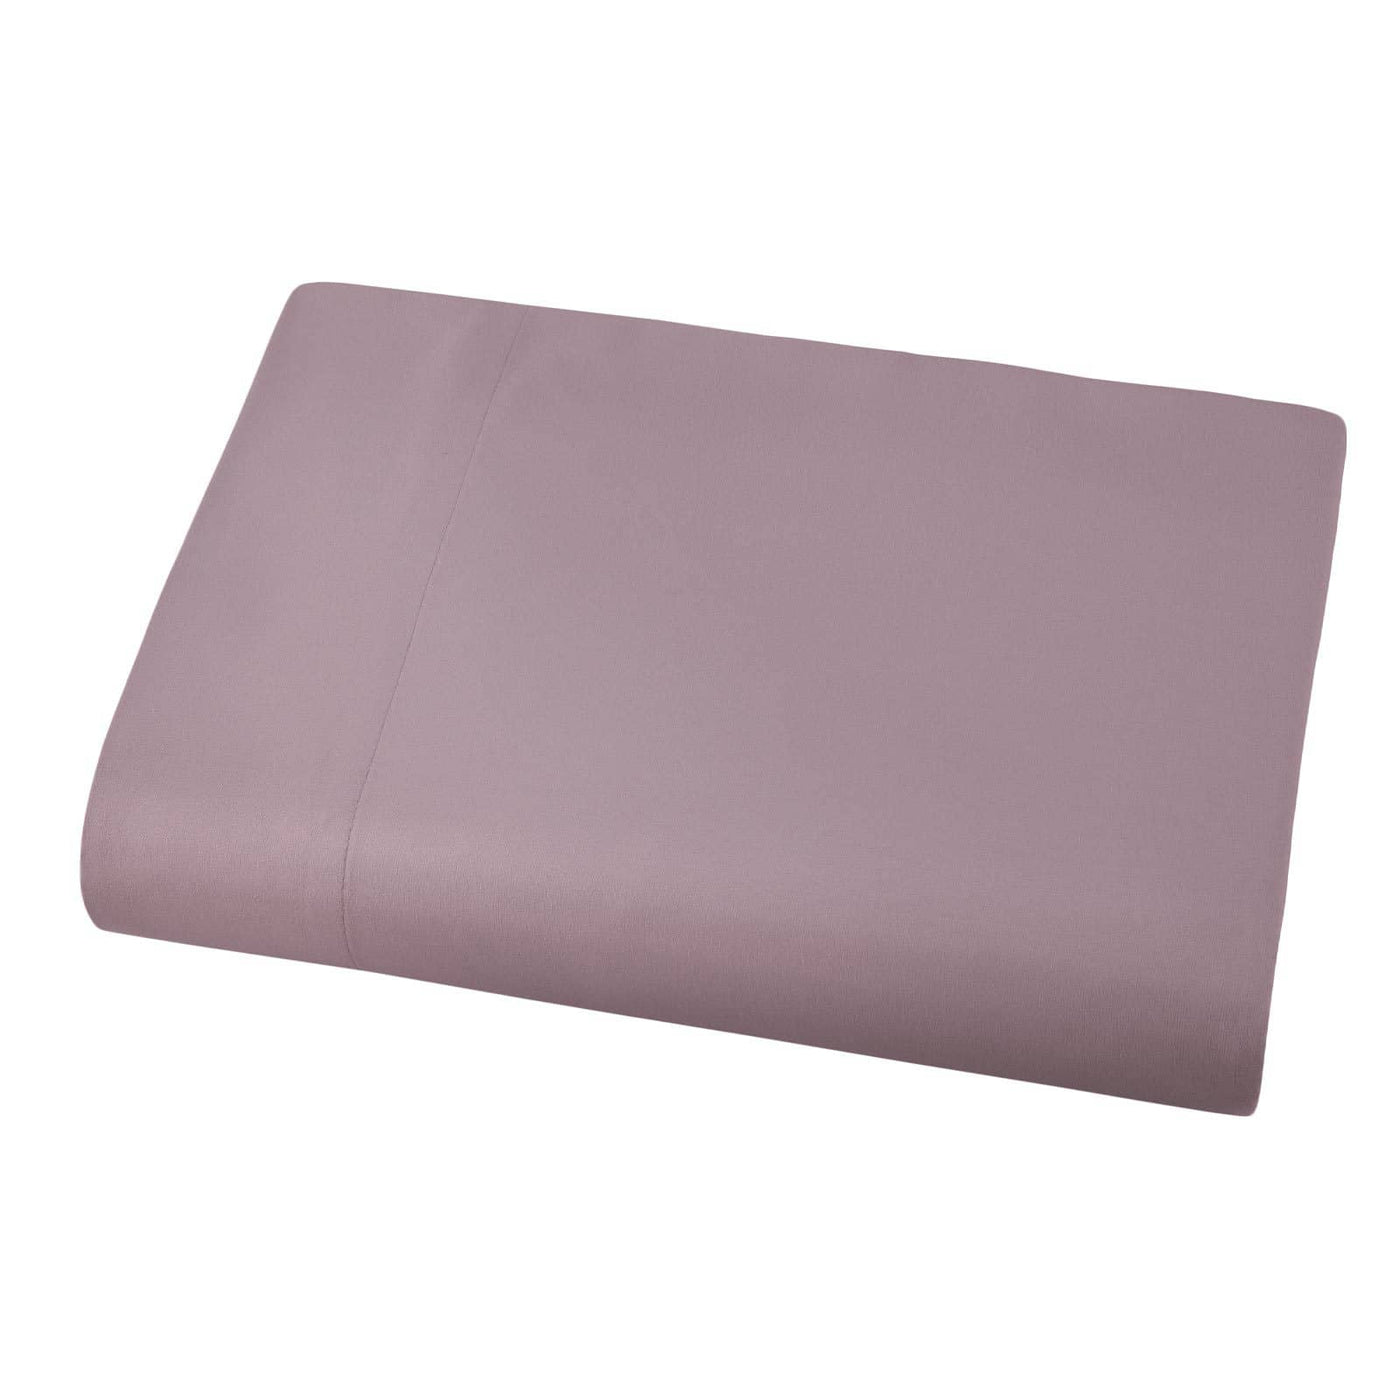 Soft and Luxurious Over-sized Flat Sheet 132 in x 110 in by Vilano springs in Lavender#color_vilano-lavender